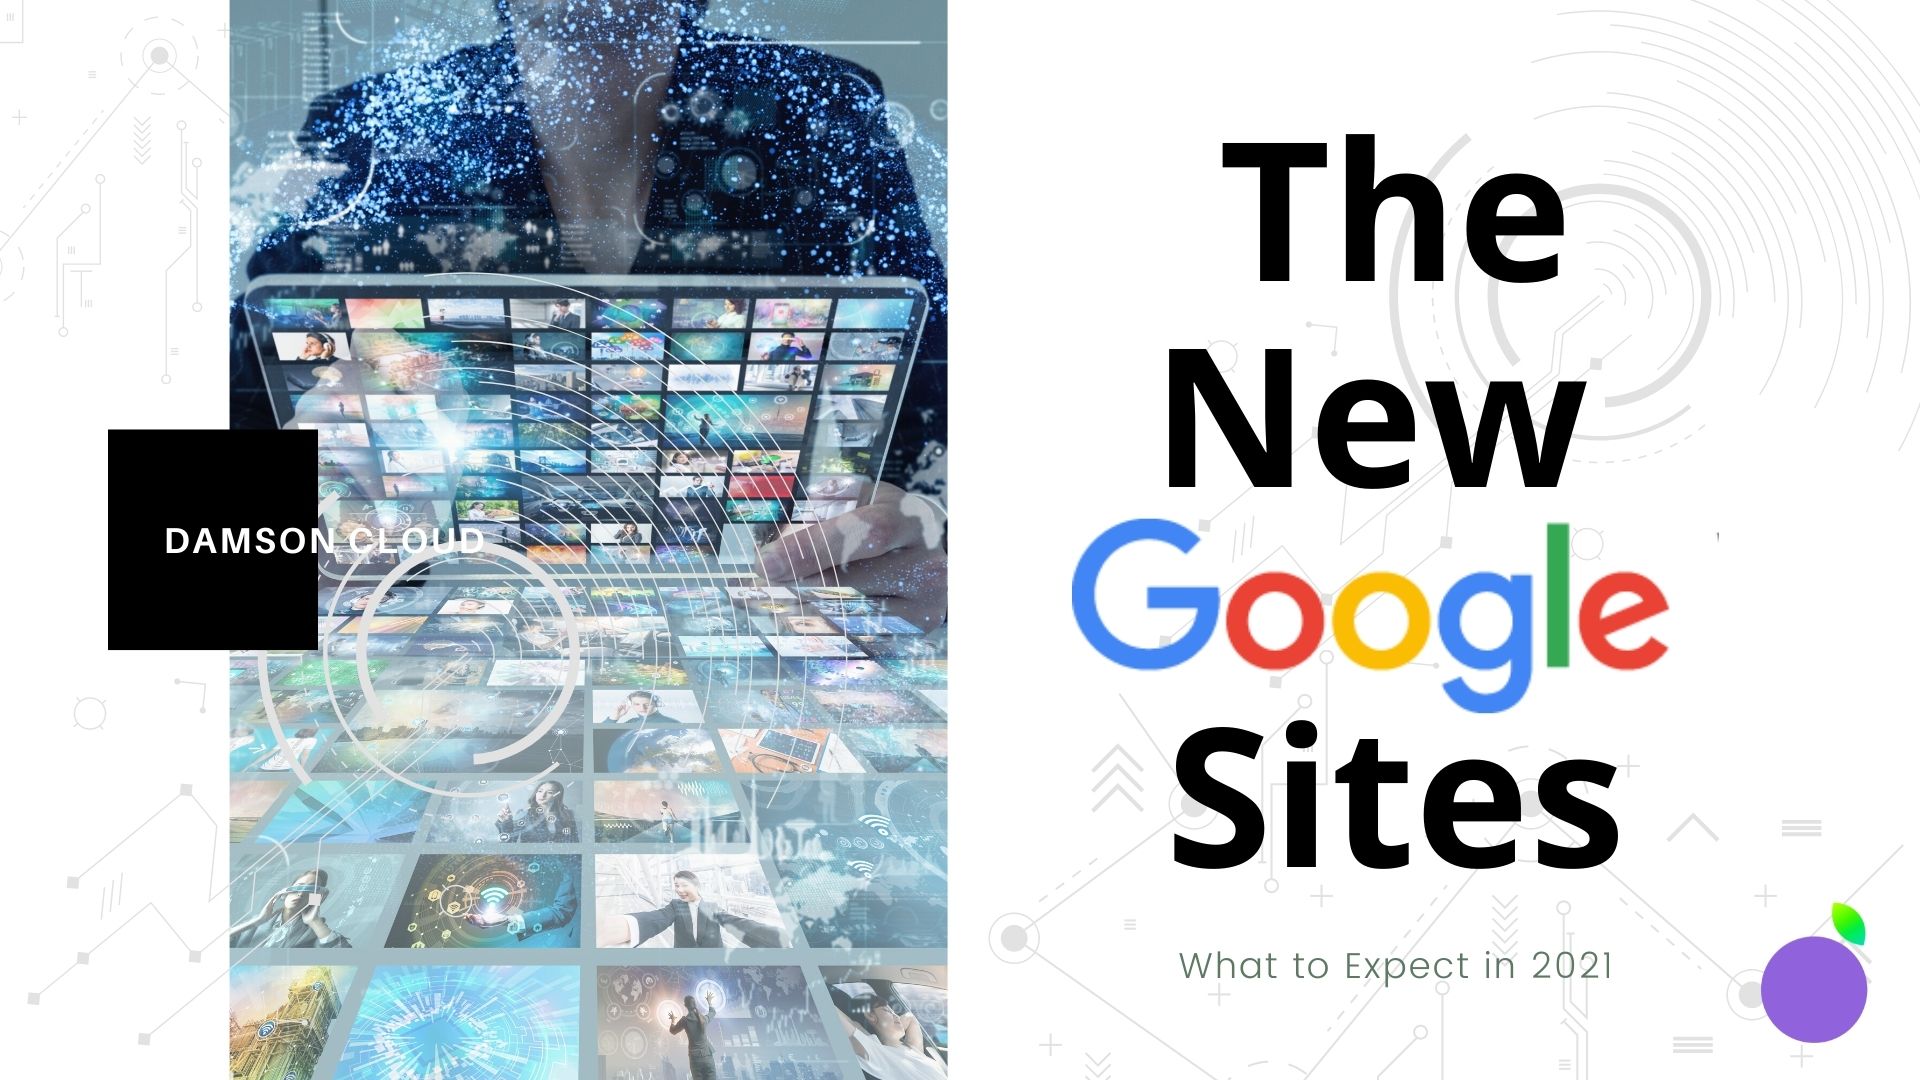 The New Google Sites: What to Expect